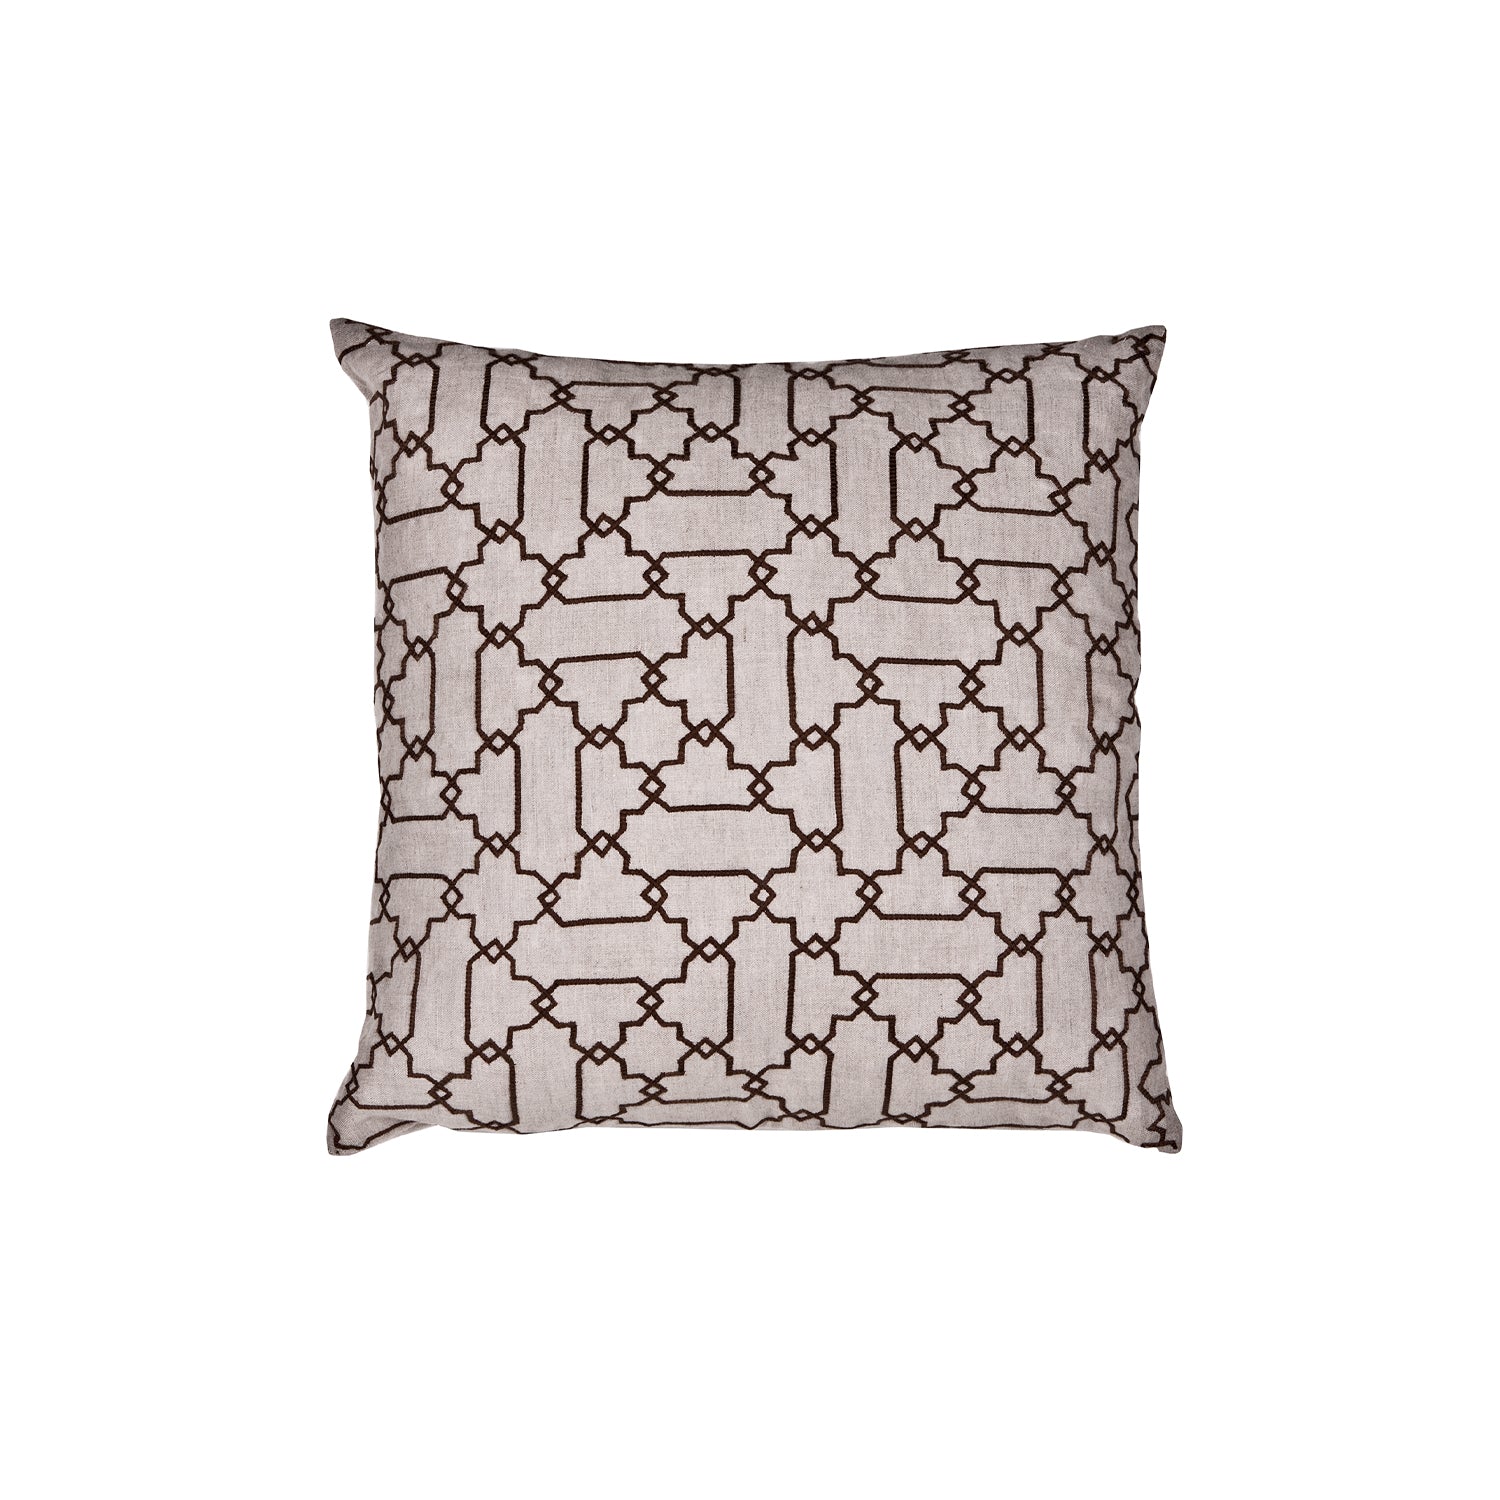 Square throw pillow with a repeating linear pattern of interlocking Moroccan tiles in brown on a greige field.